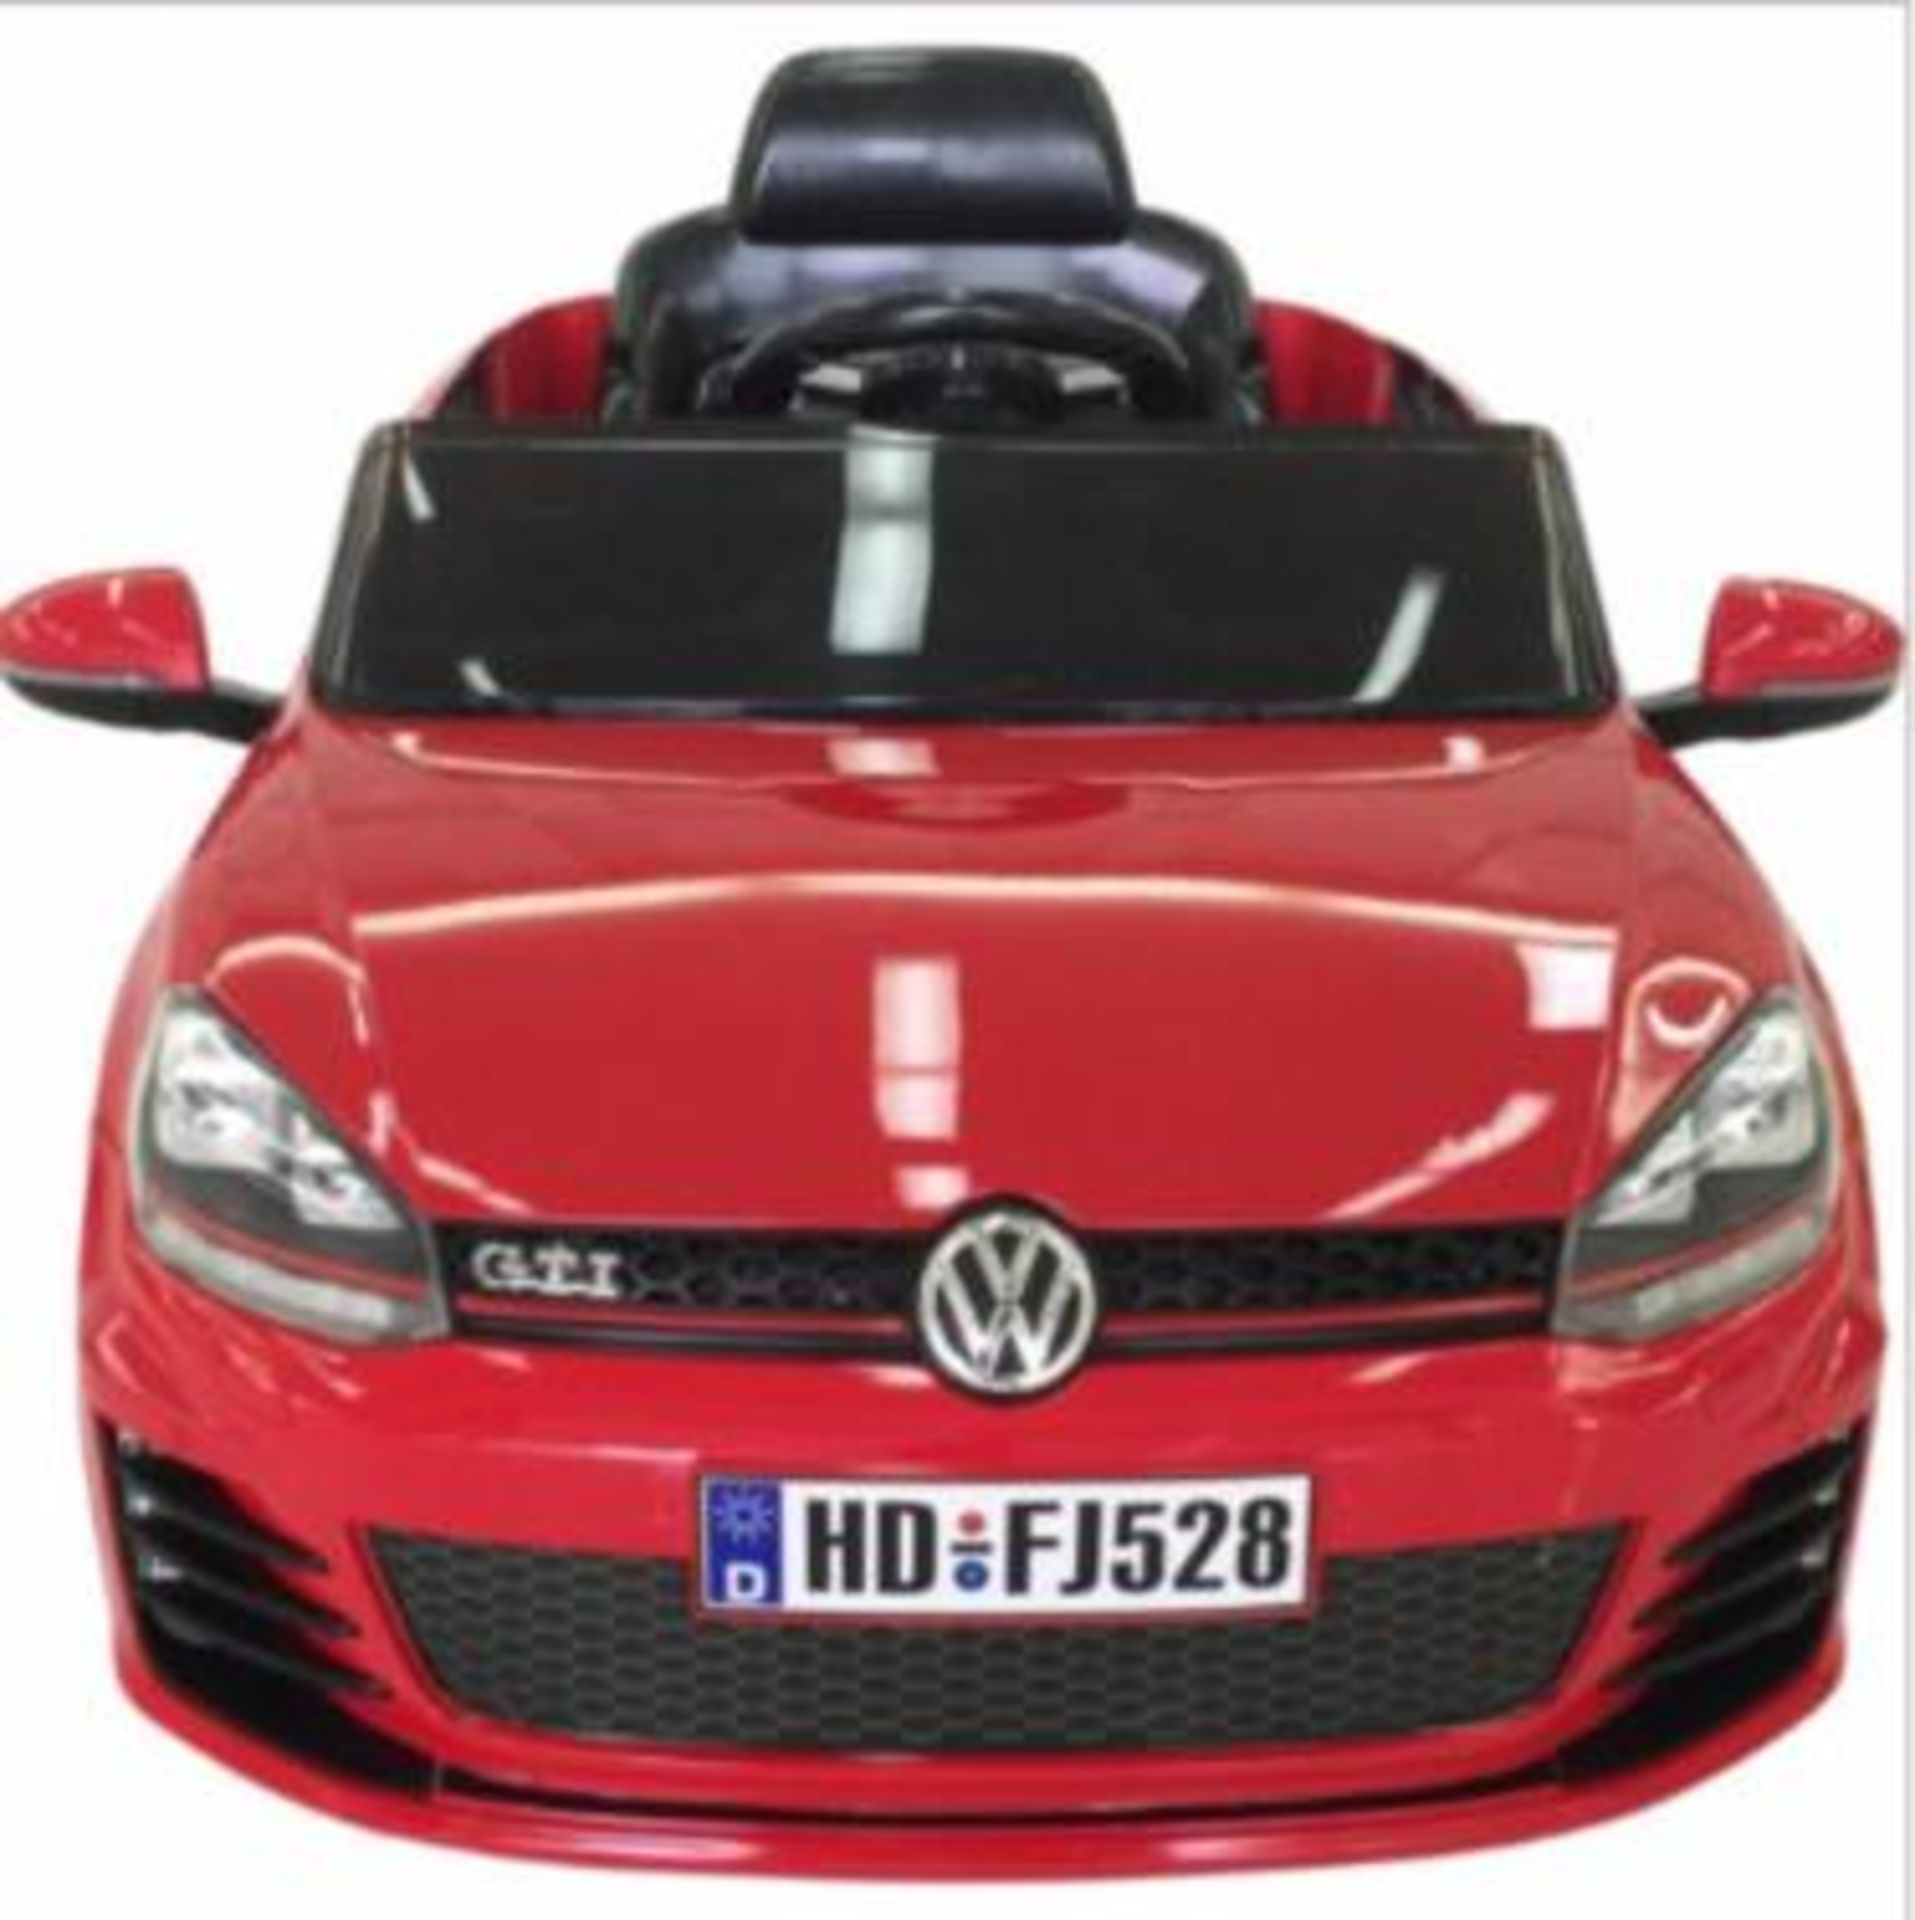 V *TRADE QTY* Brand New Ride In Golf GTi VW Licensed 1:4 Scale Design With 2.4G One-2-One Code